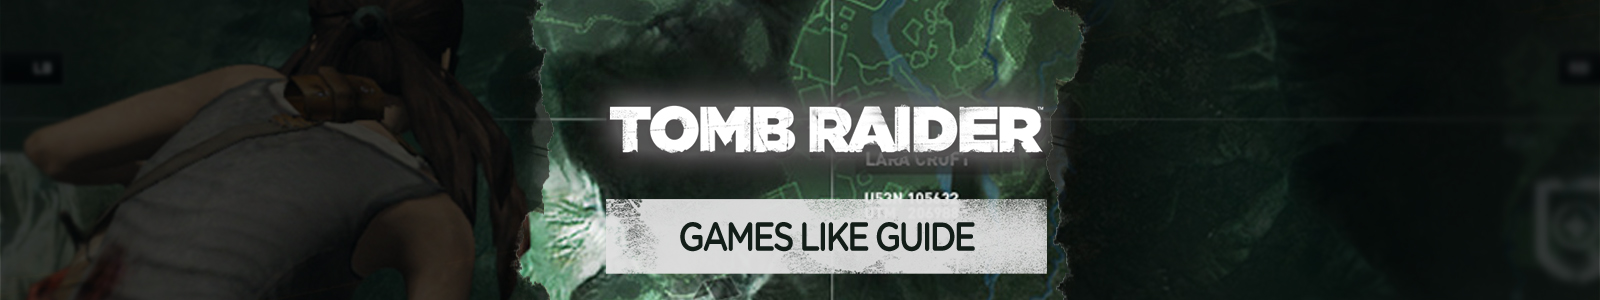 Shadow Of The Tomb Raider games like guide